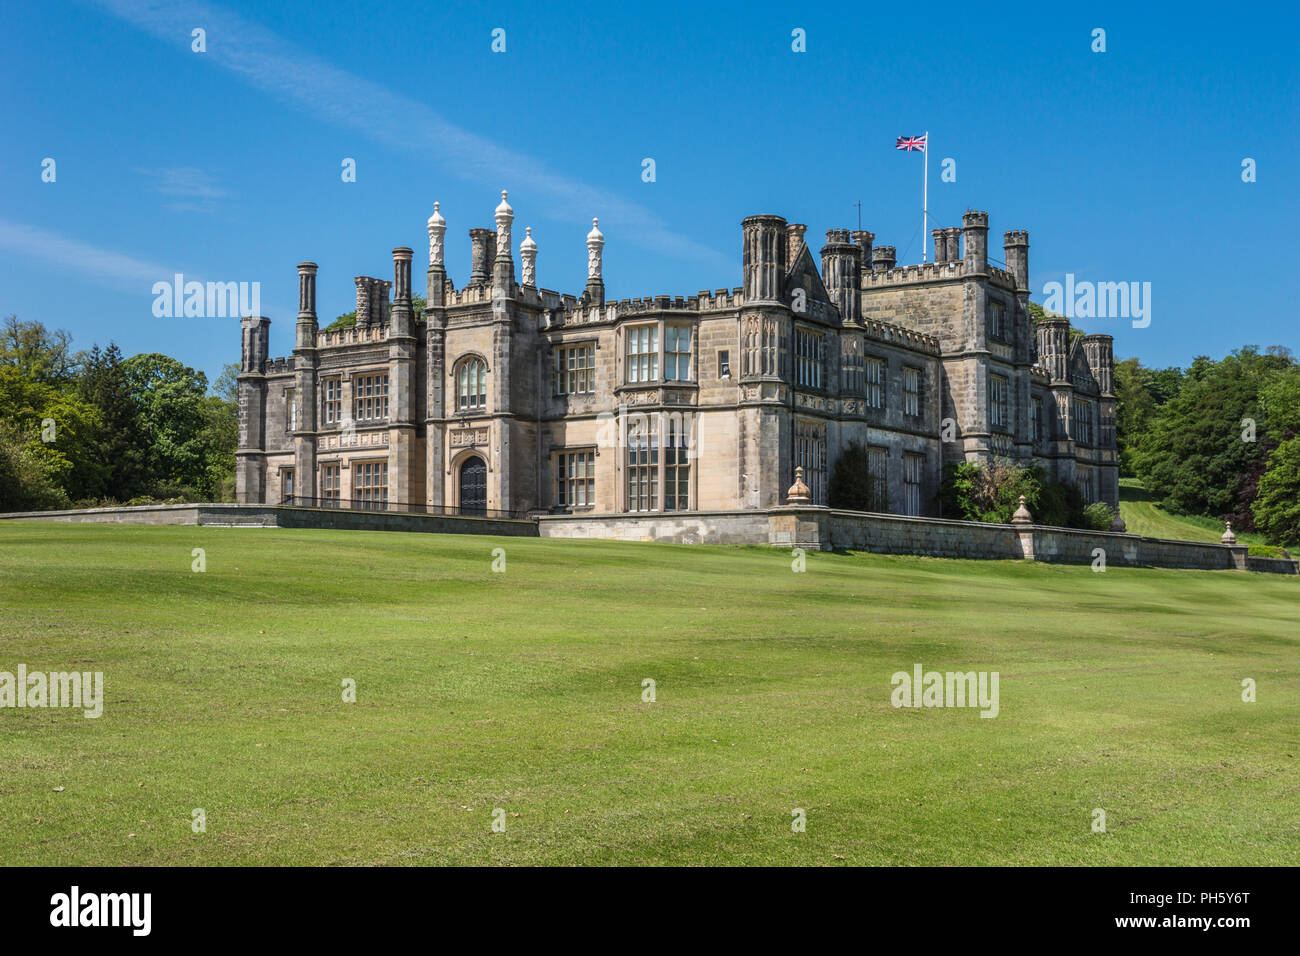 Edinburgh, Scotland, UK - June 14, 2012: Dalmany house, mansion and castle in Tudor revival style on green lawn, with Brittish flag and under blue sky Stock Photo